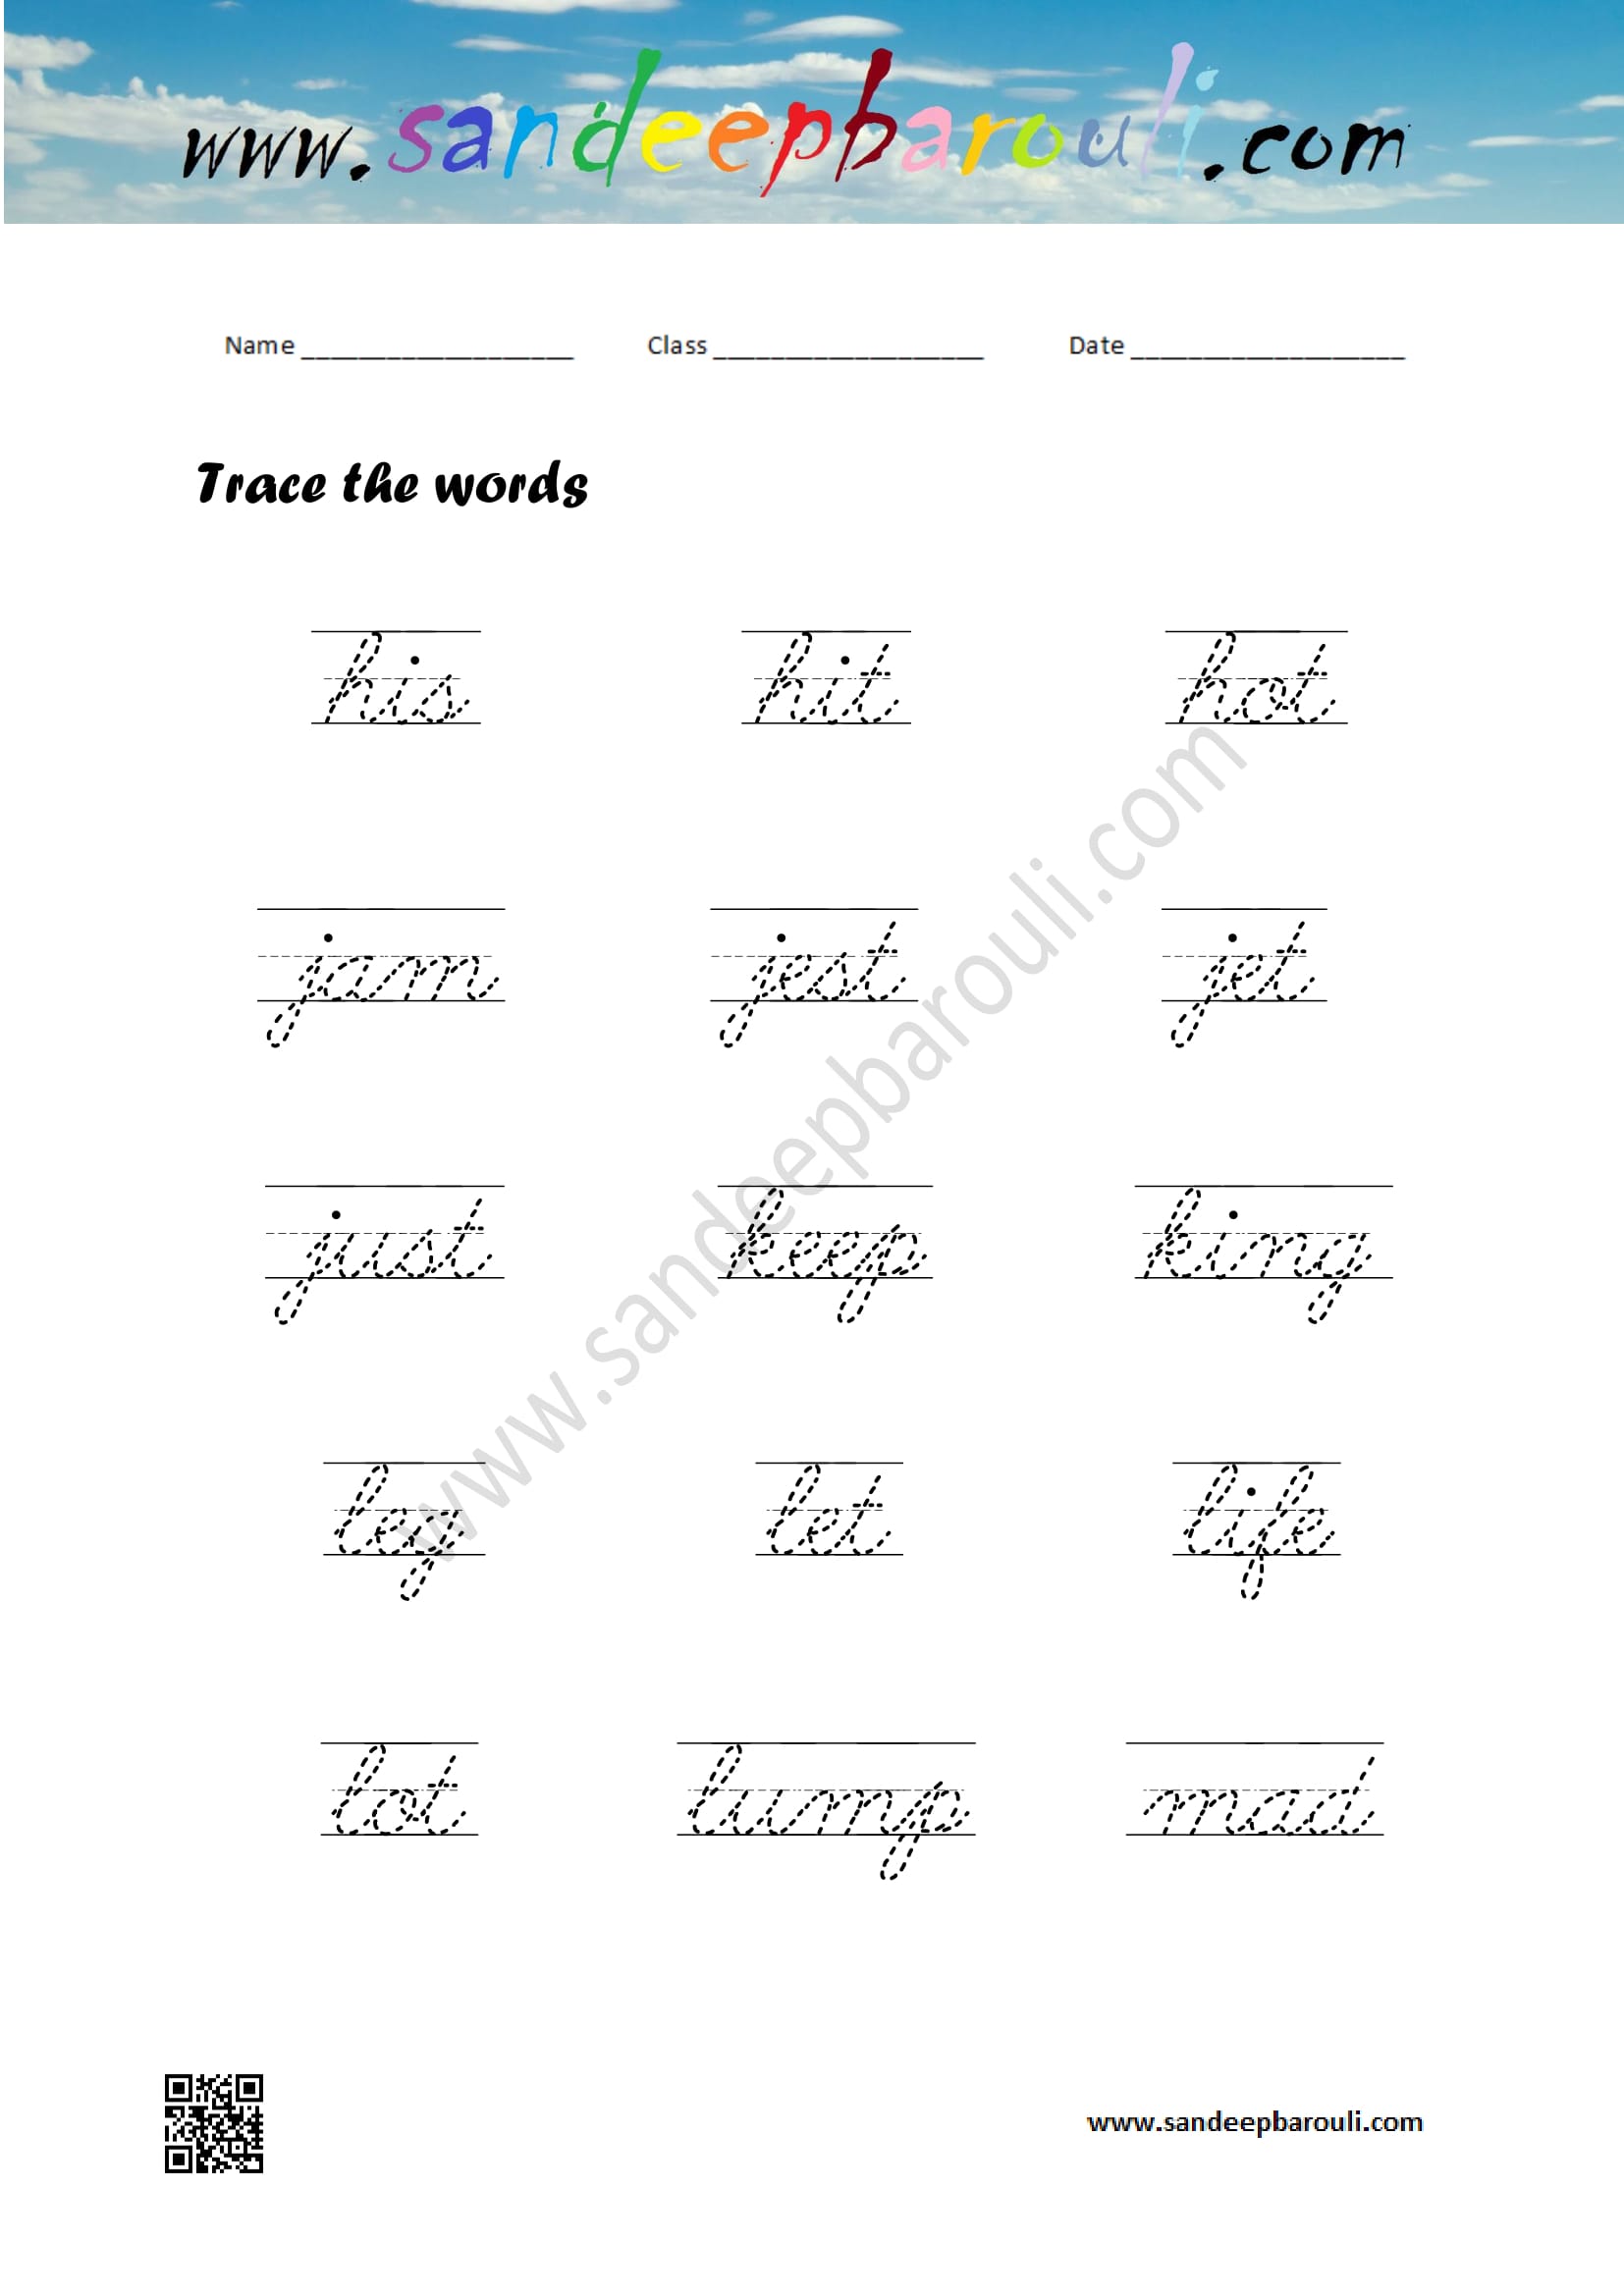 Cursive Writing Worksheet – Trace the words (5)